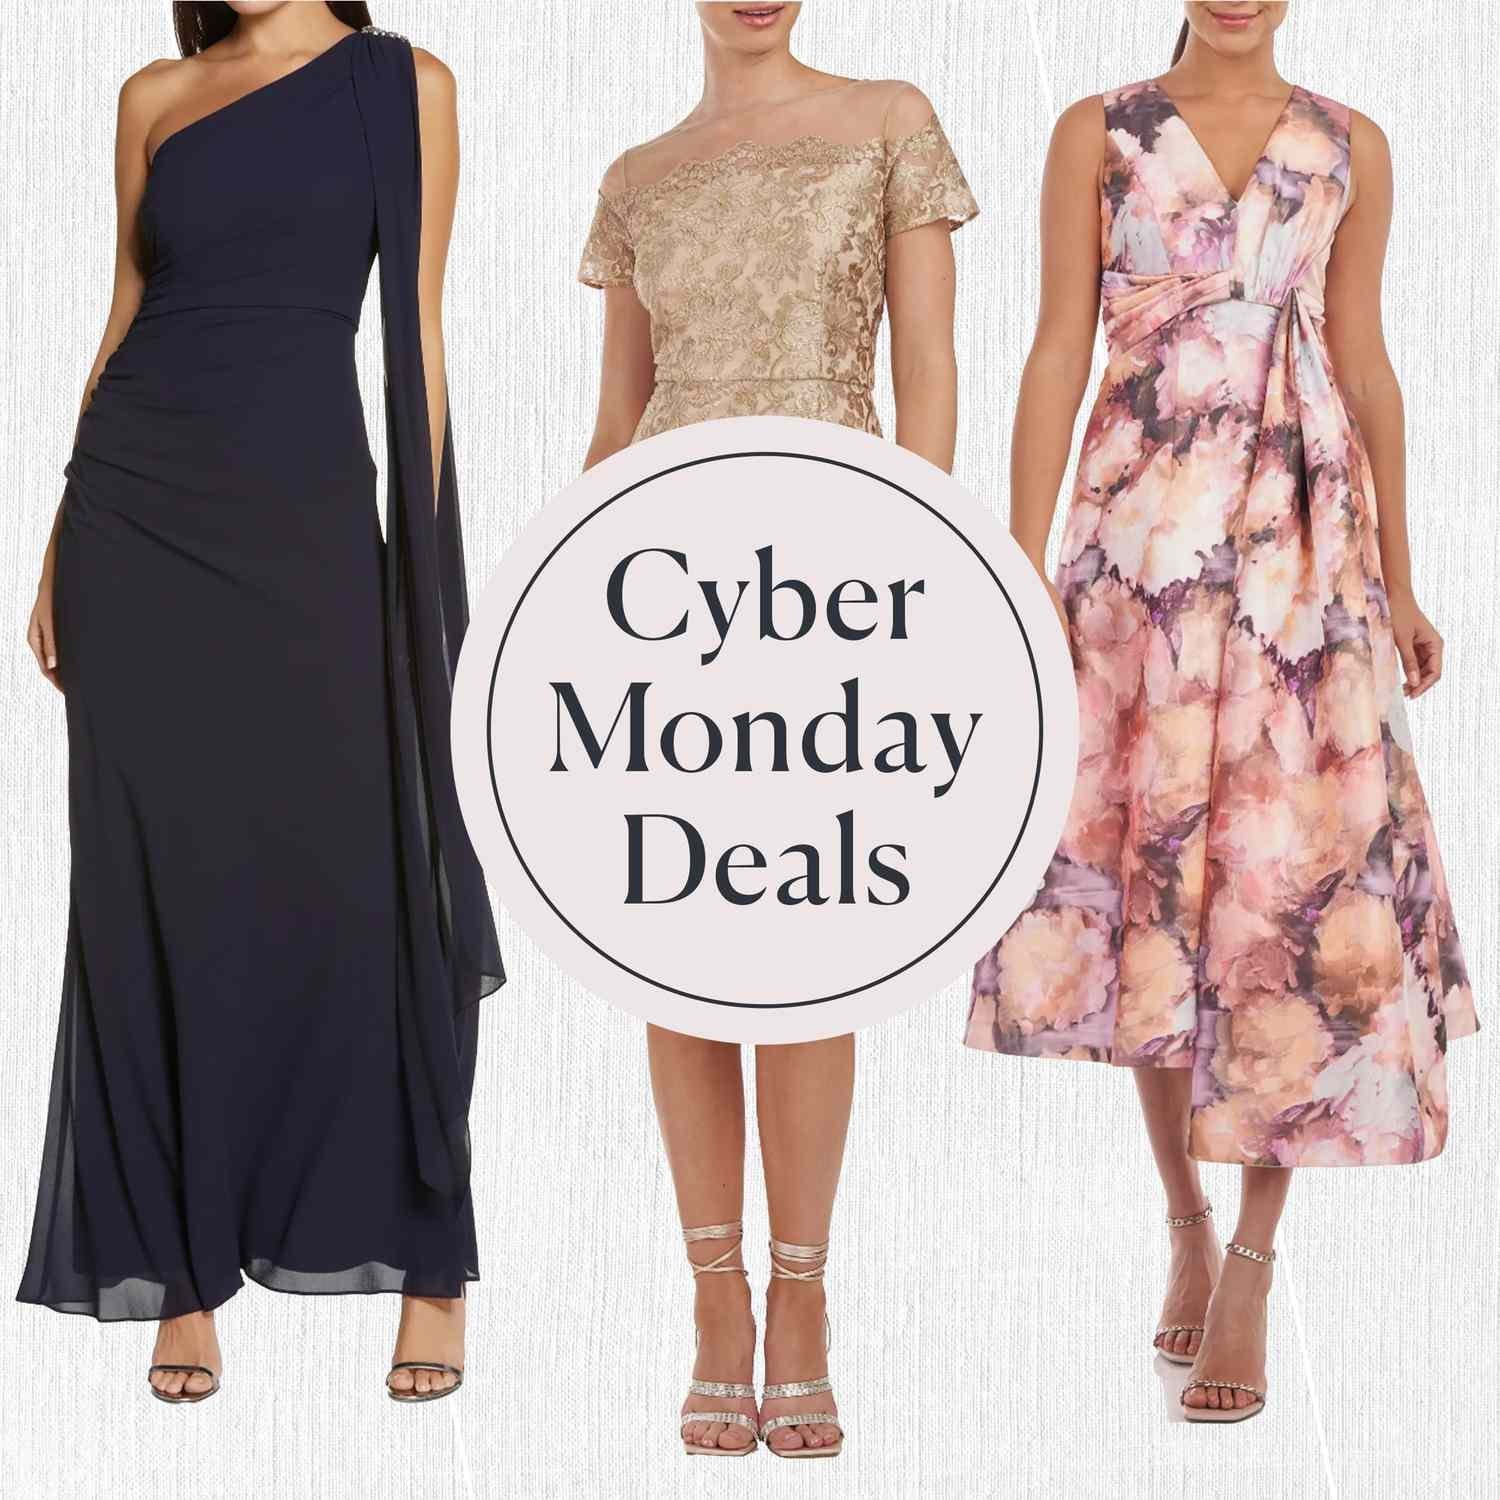 Designer Mother of the Bride Dresses Are Up to 70% Off During Nordstrom’s Cyber Monday Sale